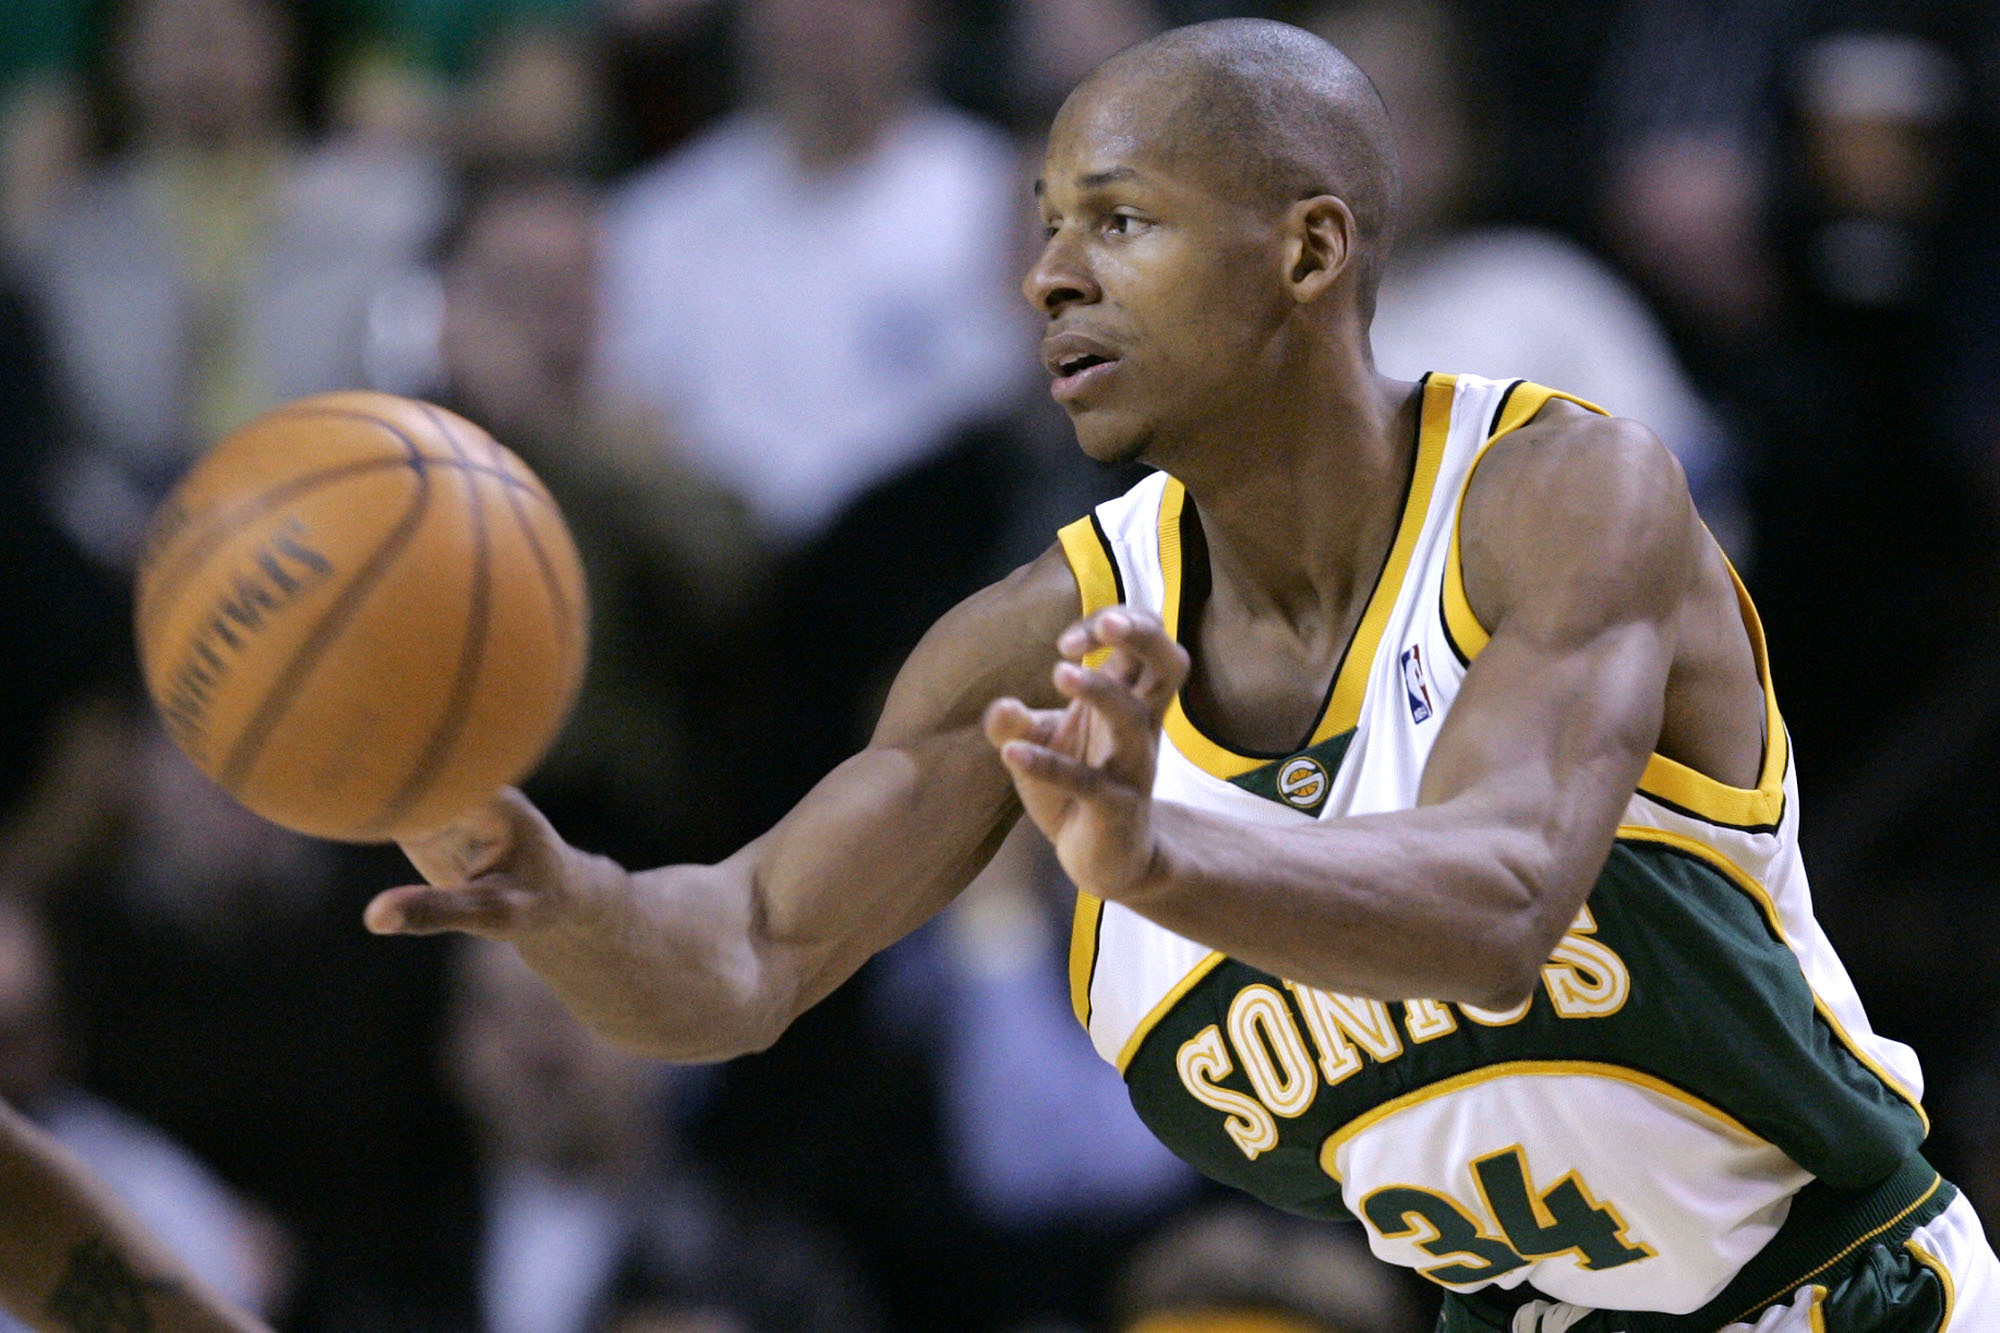 Ray Allen - legend who made the most famous shot in NBA Finals history -  retires from basketball by writing open letter to his younger self